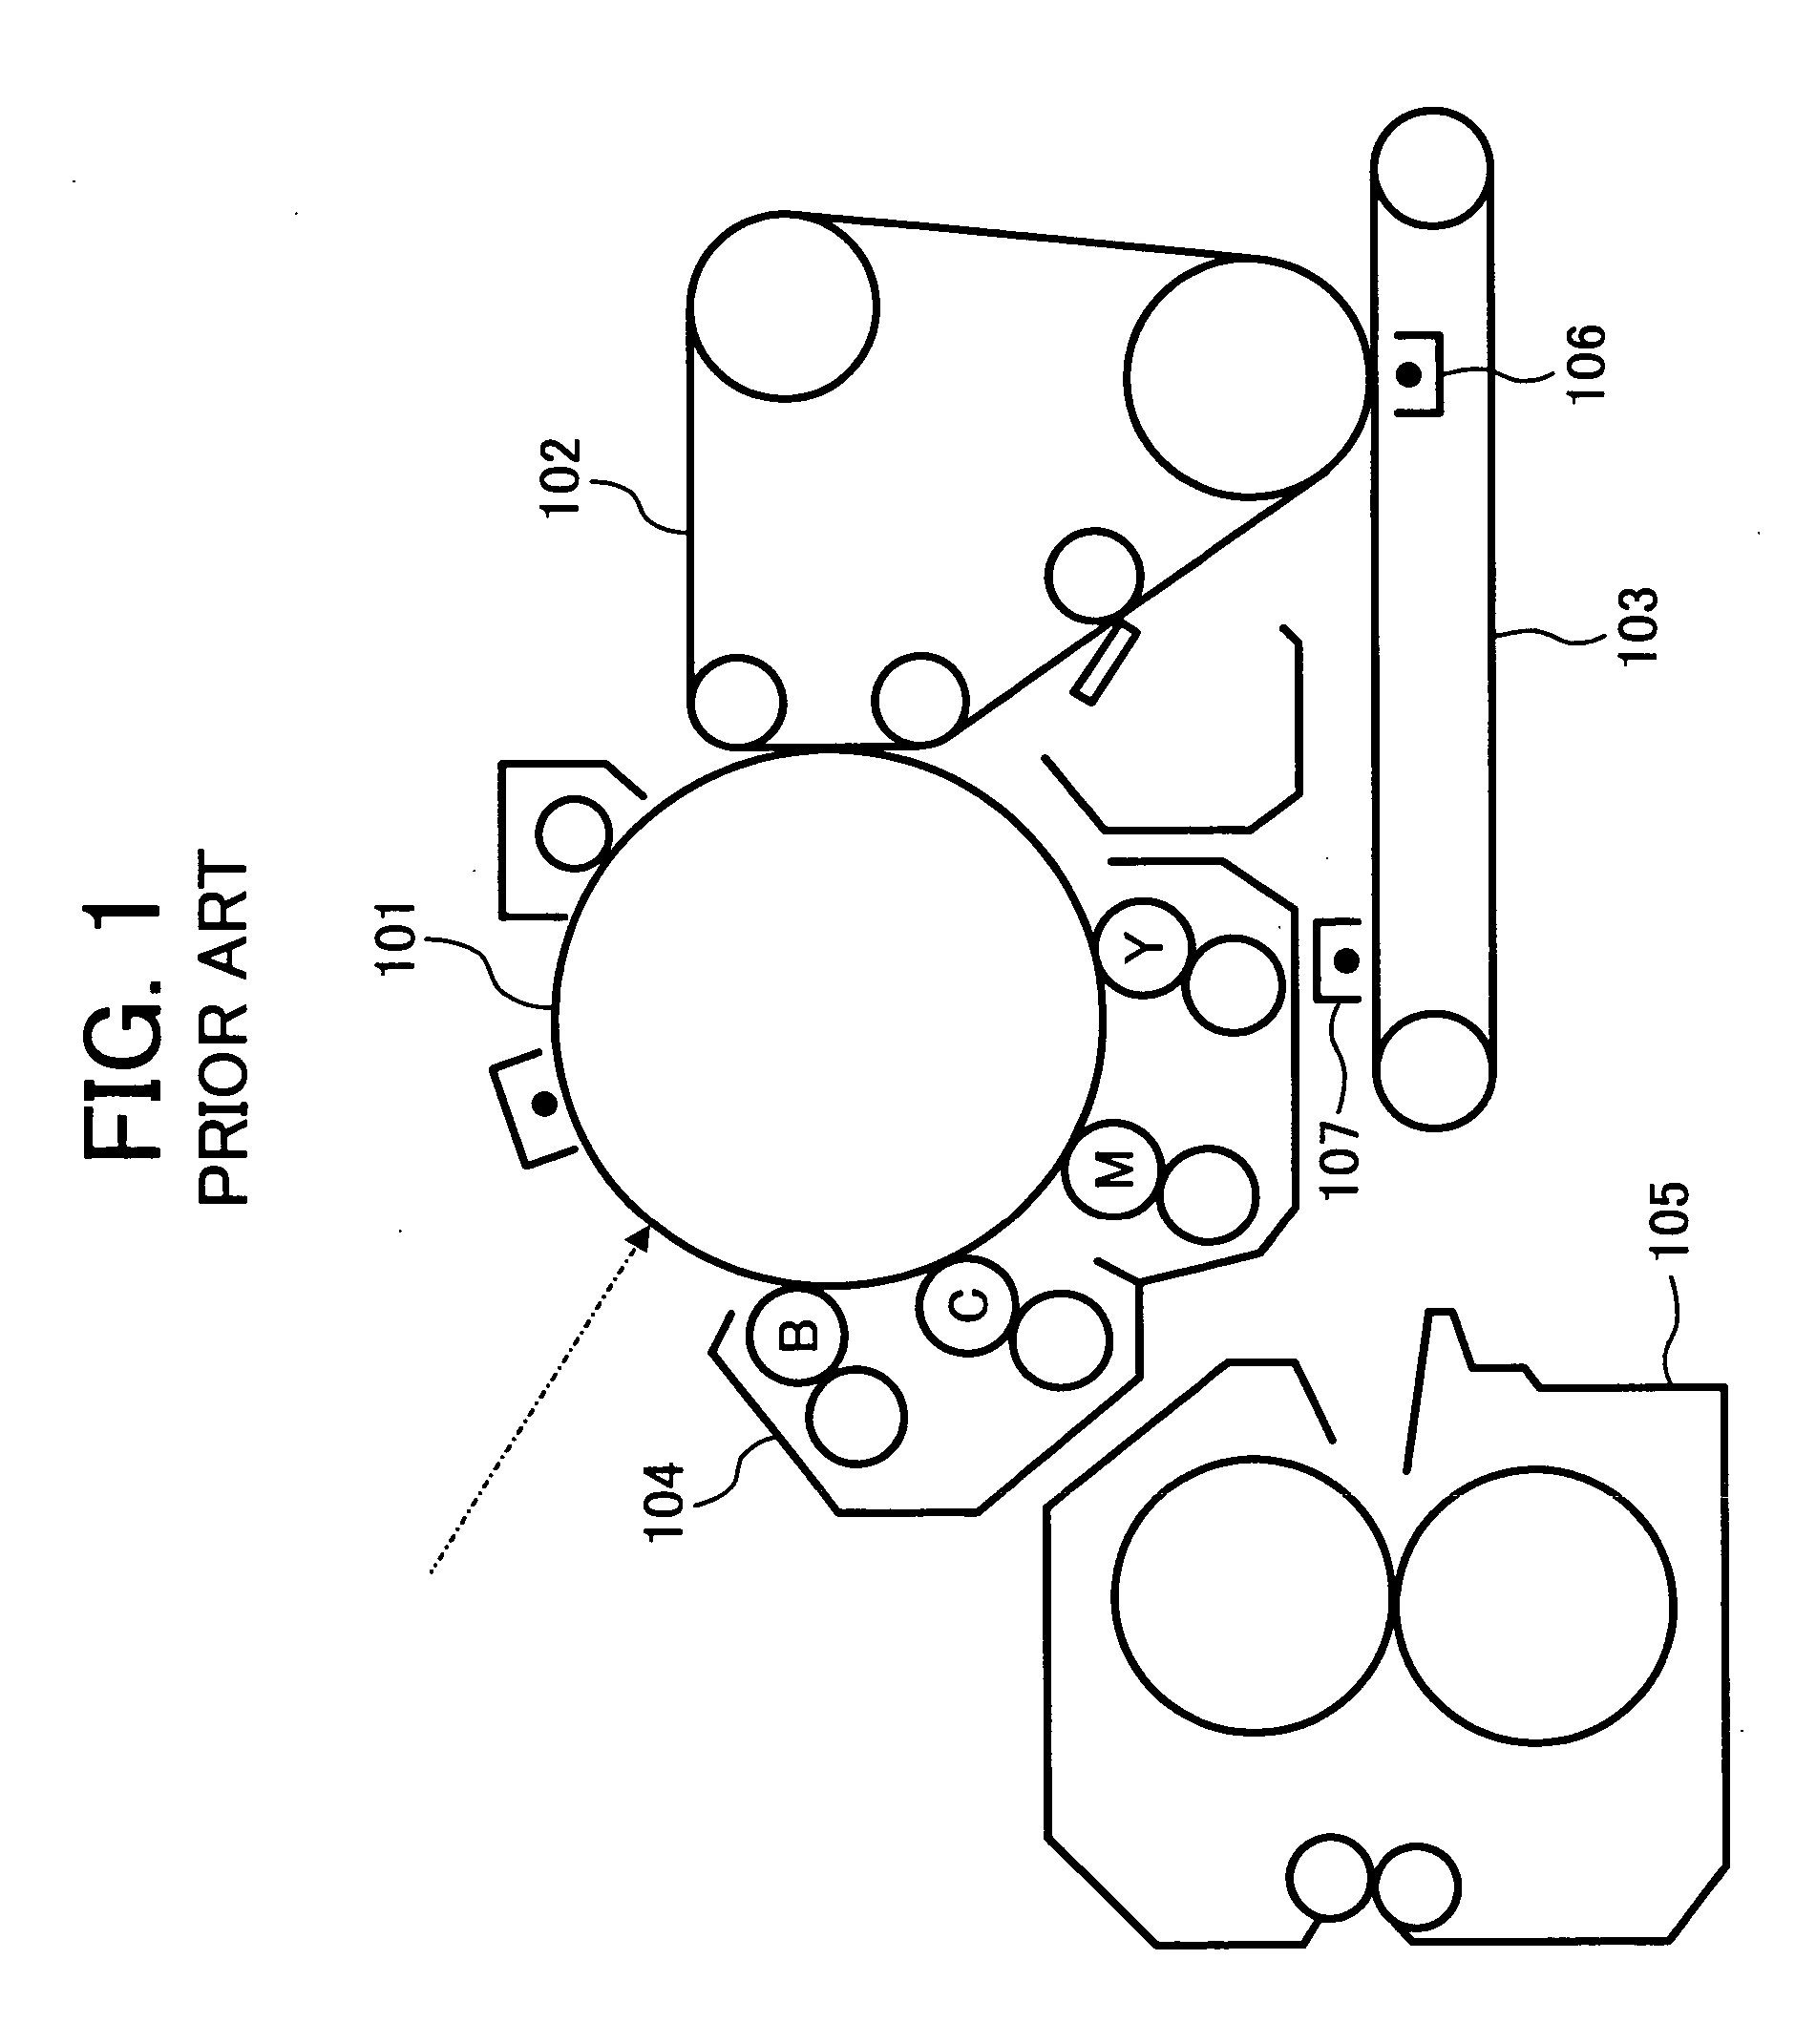 Image forming apparatus for recording on two sides in a single pass